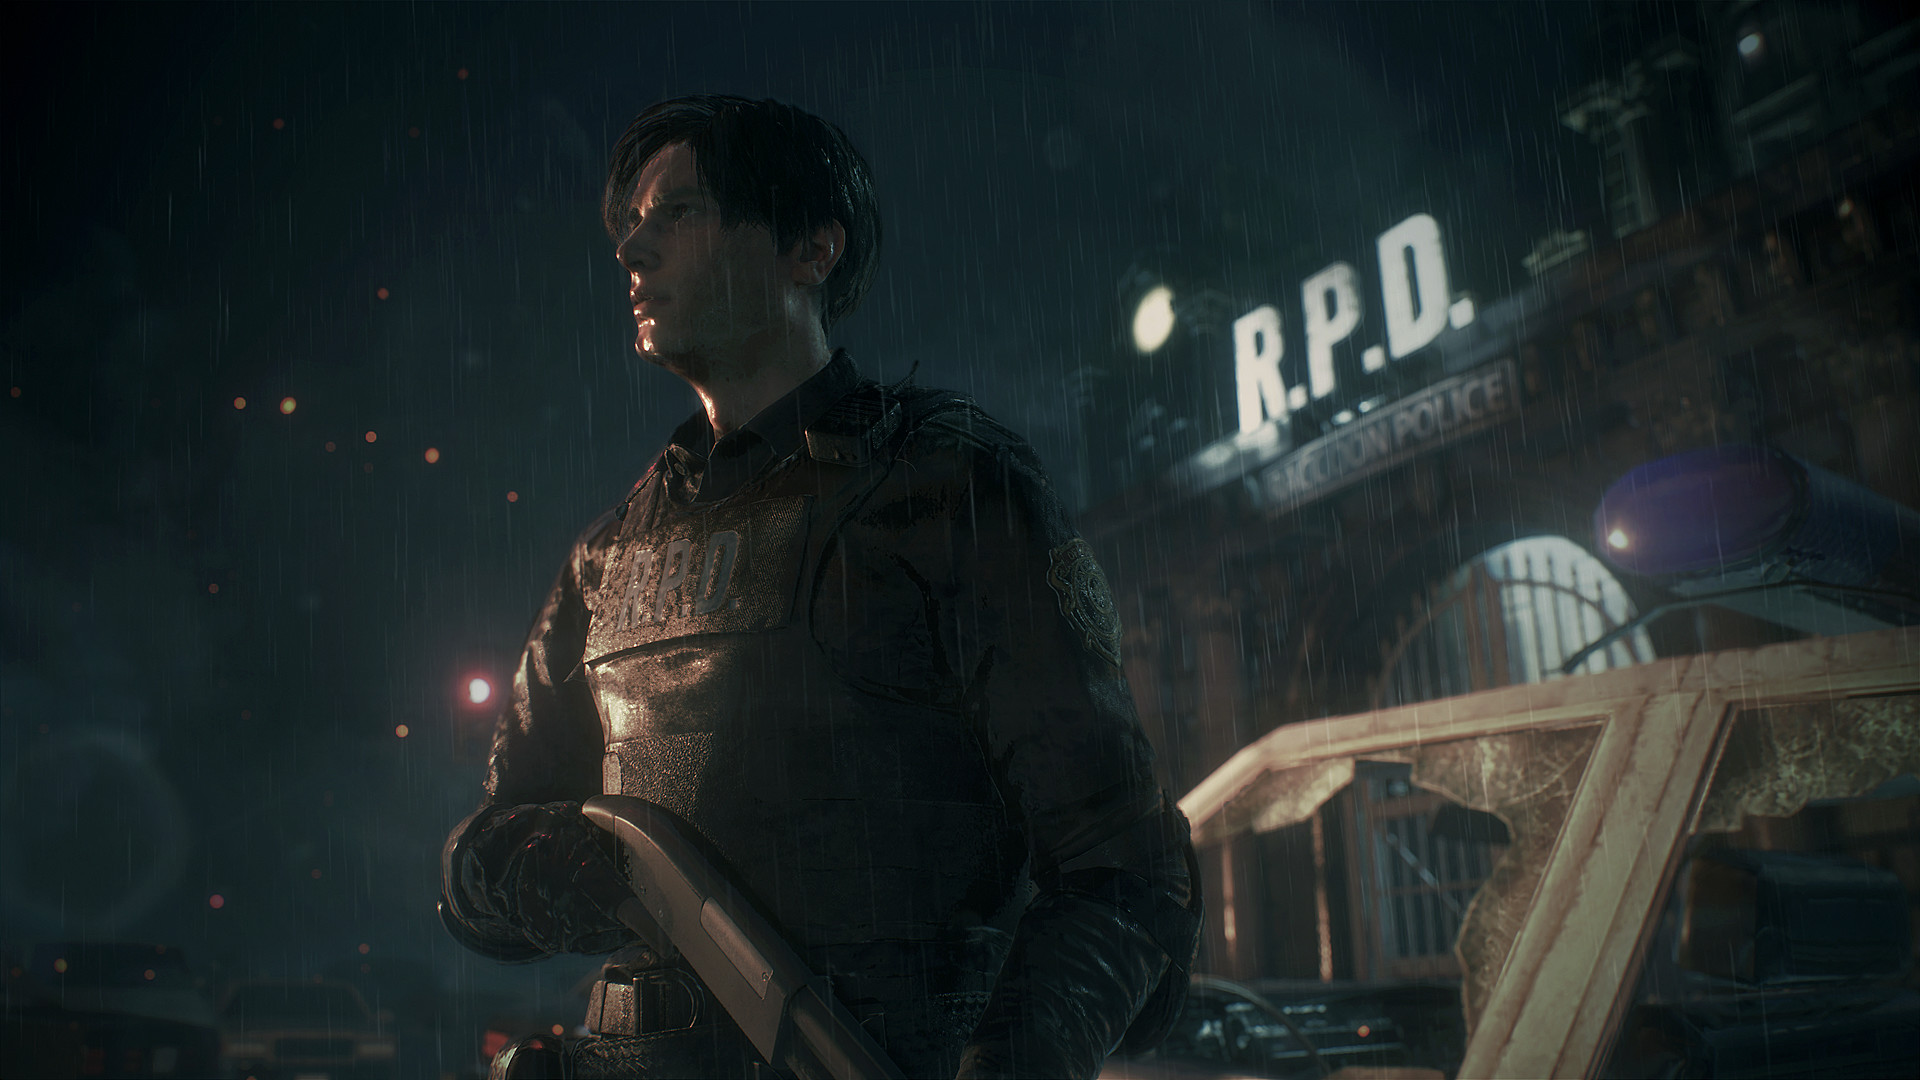 Download Resident Evil 2 Deluxe Edition para pc via torrent